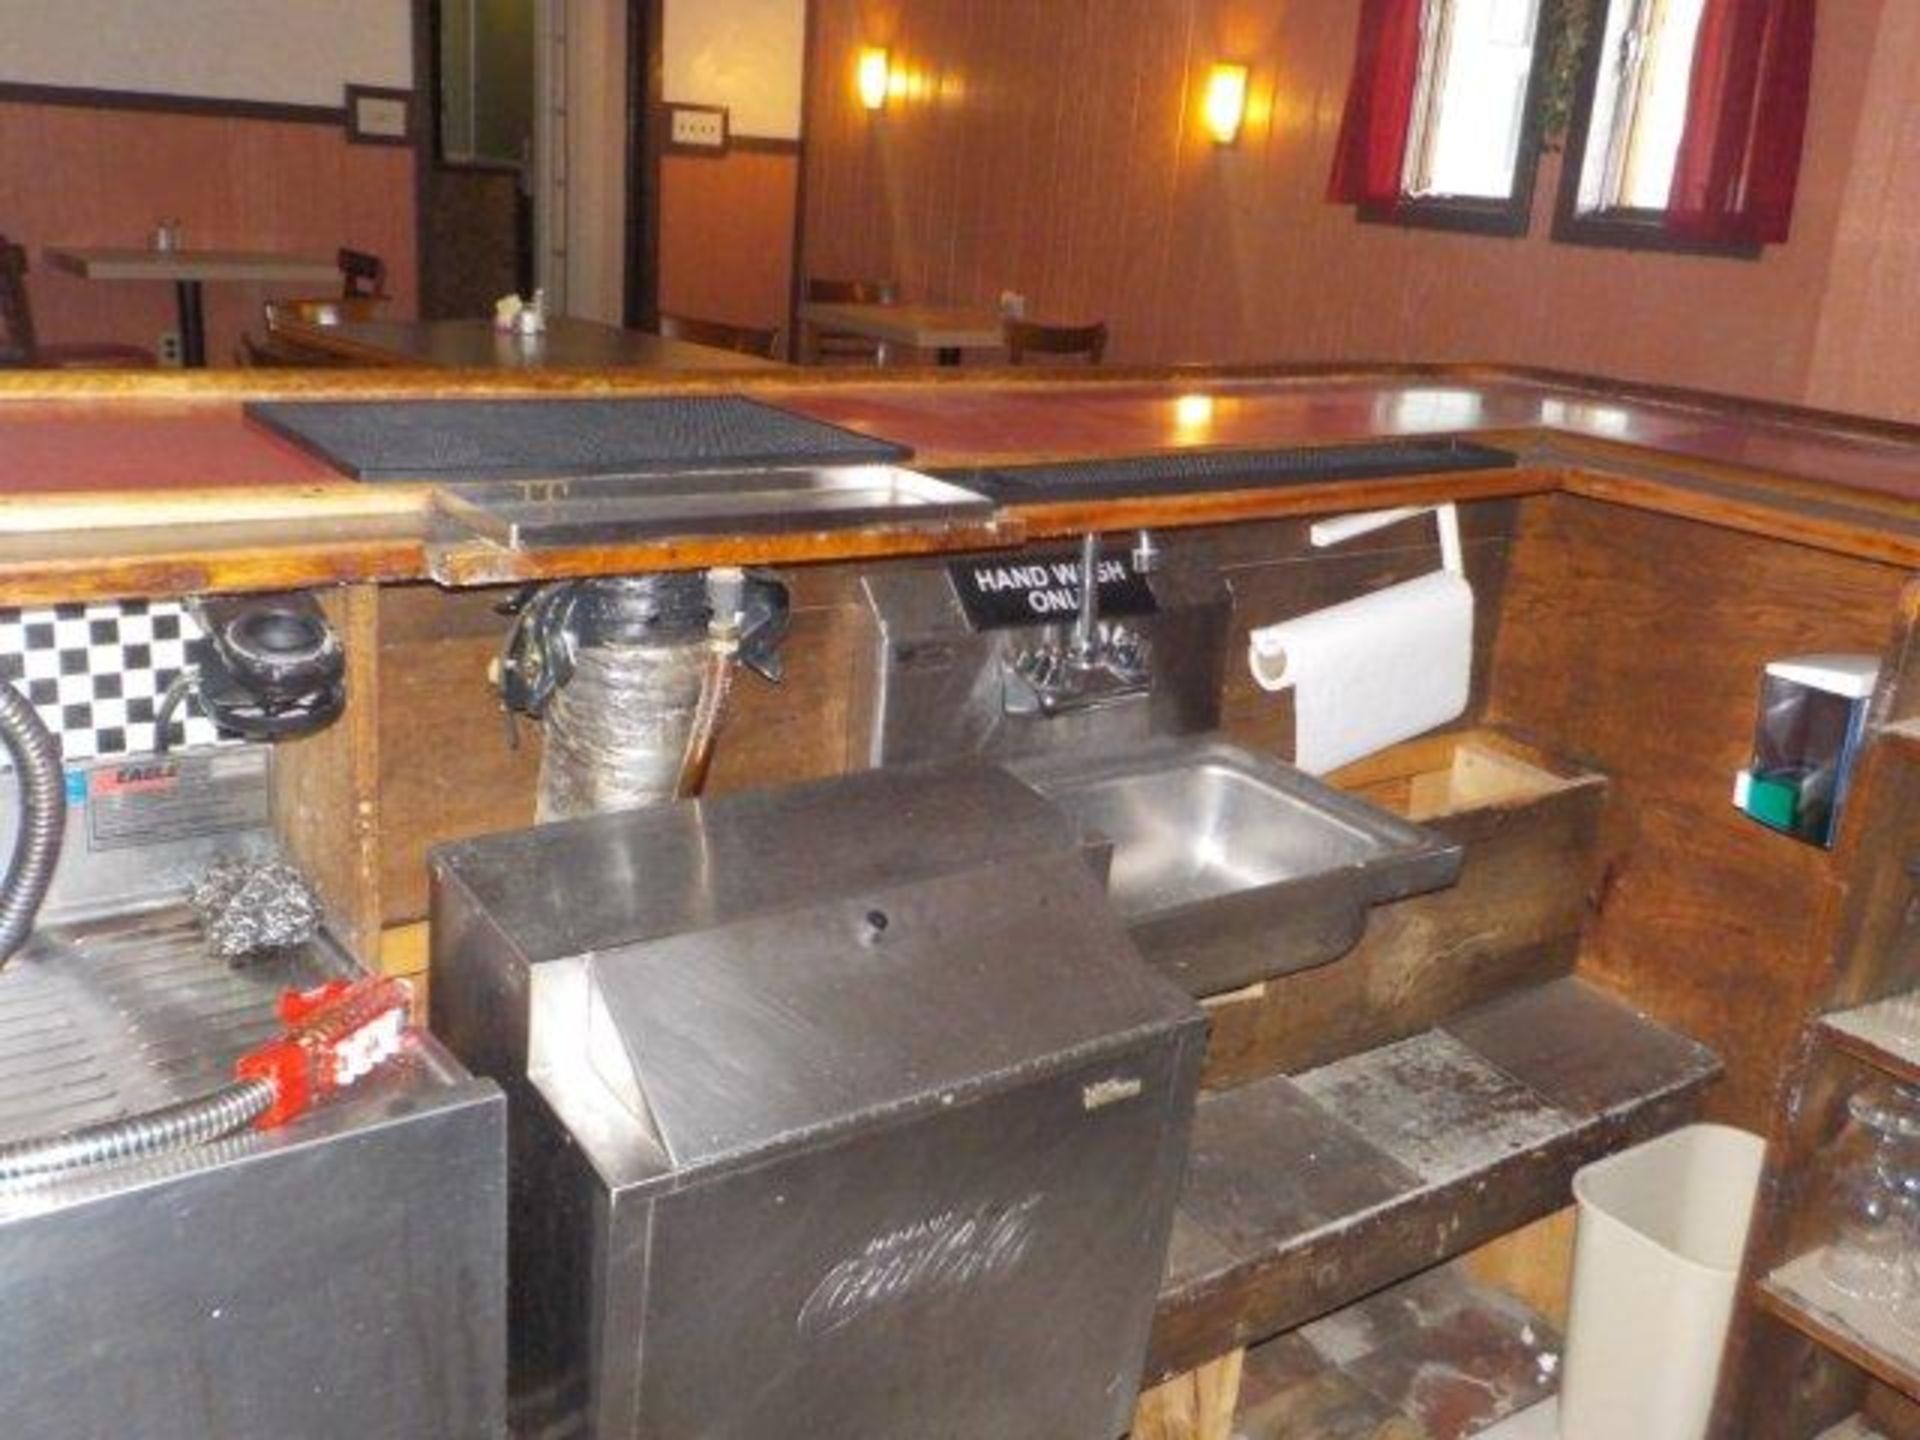 BULK BID: The Real Estate & Restaurant Equipment/Fixtures as a Whole. Lots 1 & 2. - Image 7 of 32